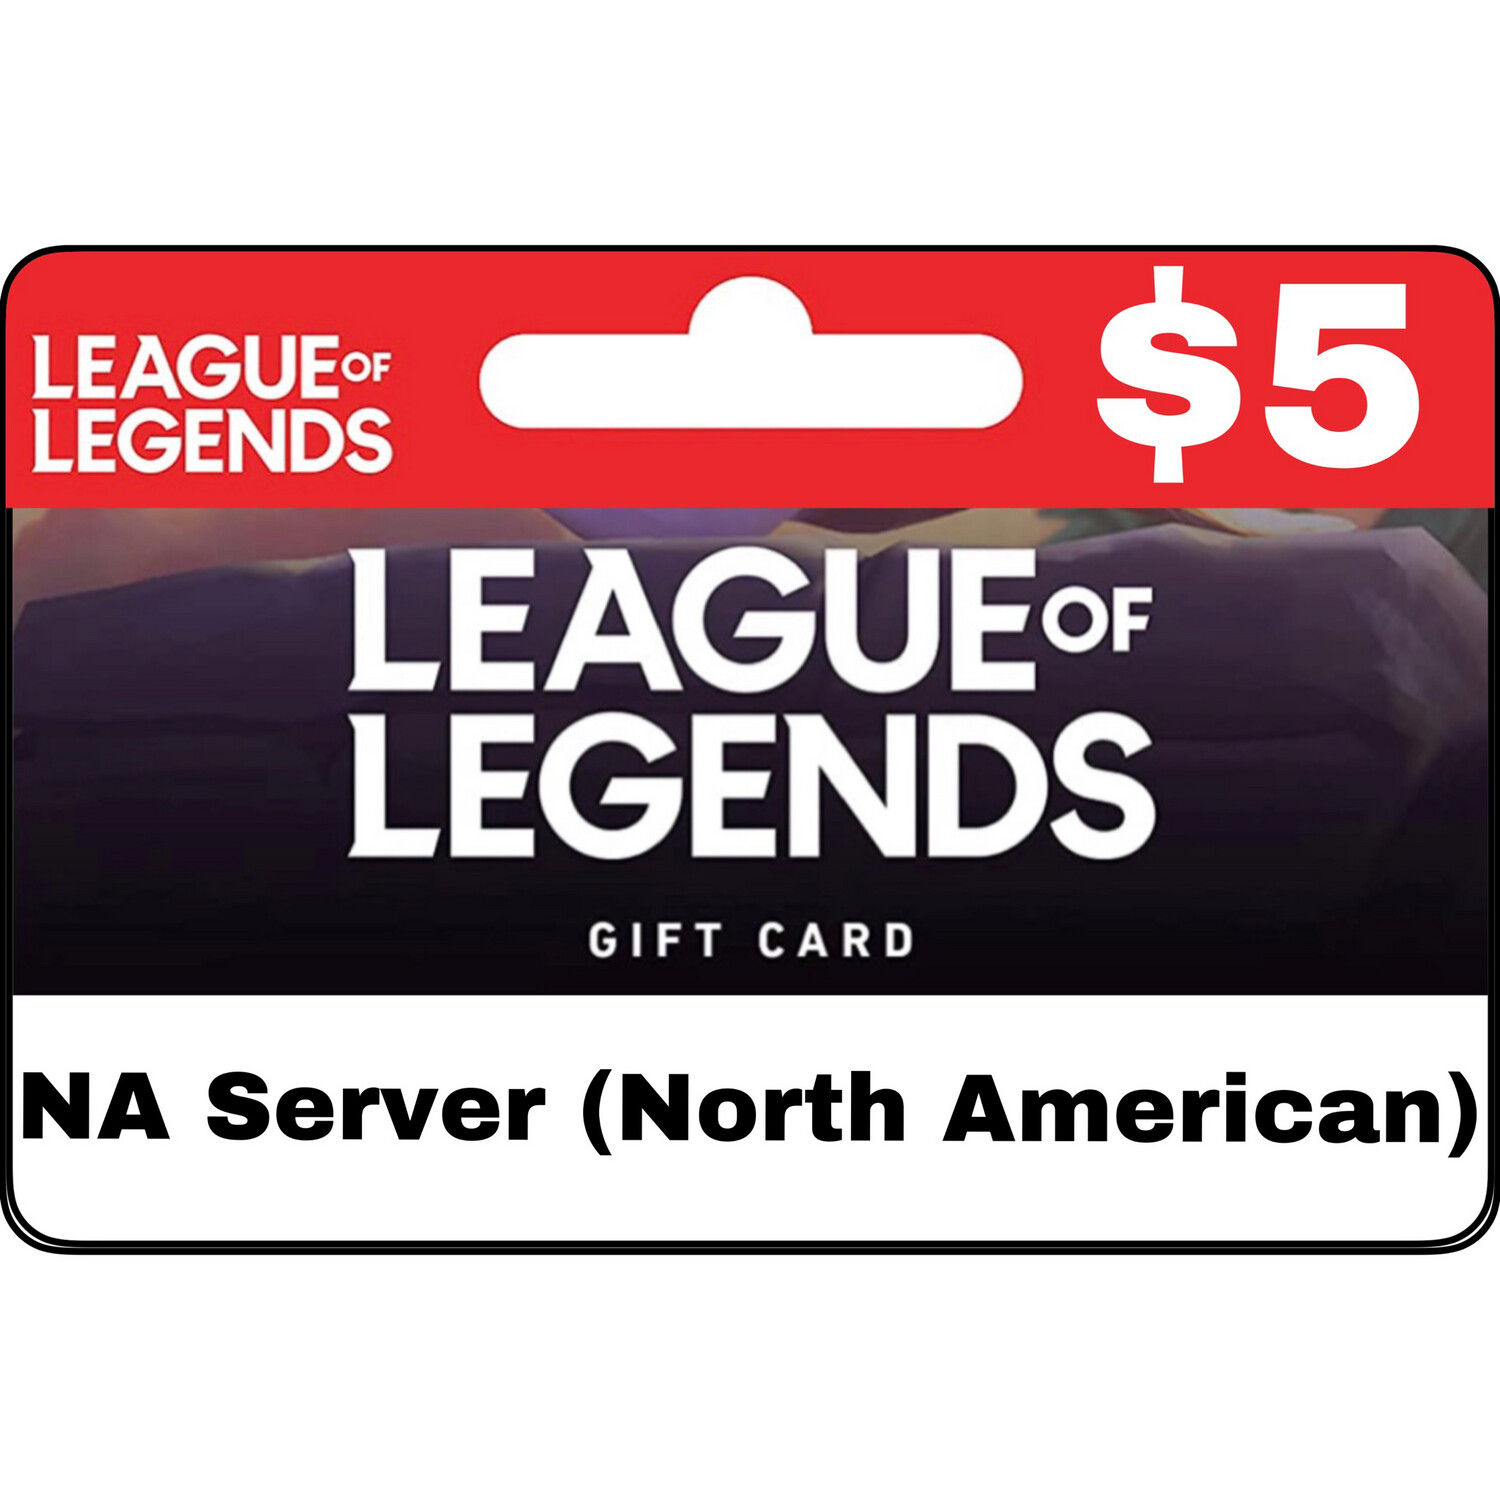 League of Legends USD $5 NA Server Gift Card